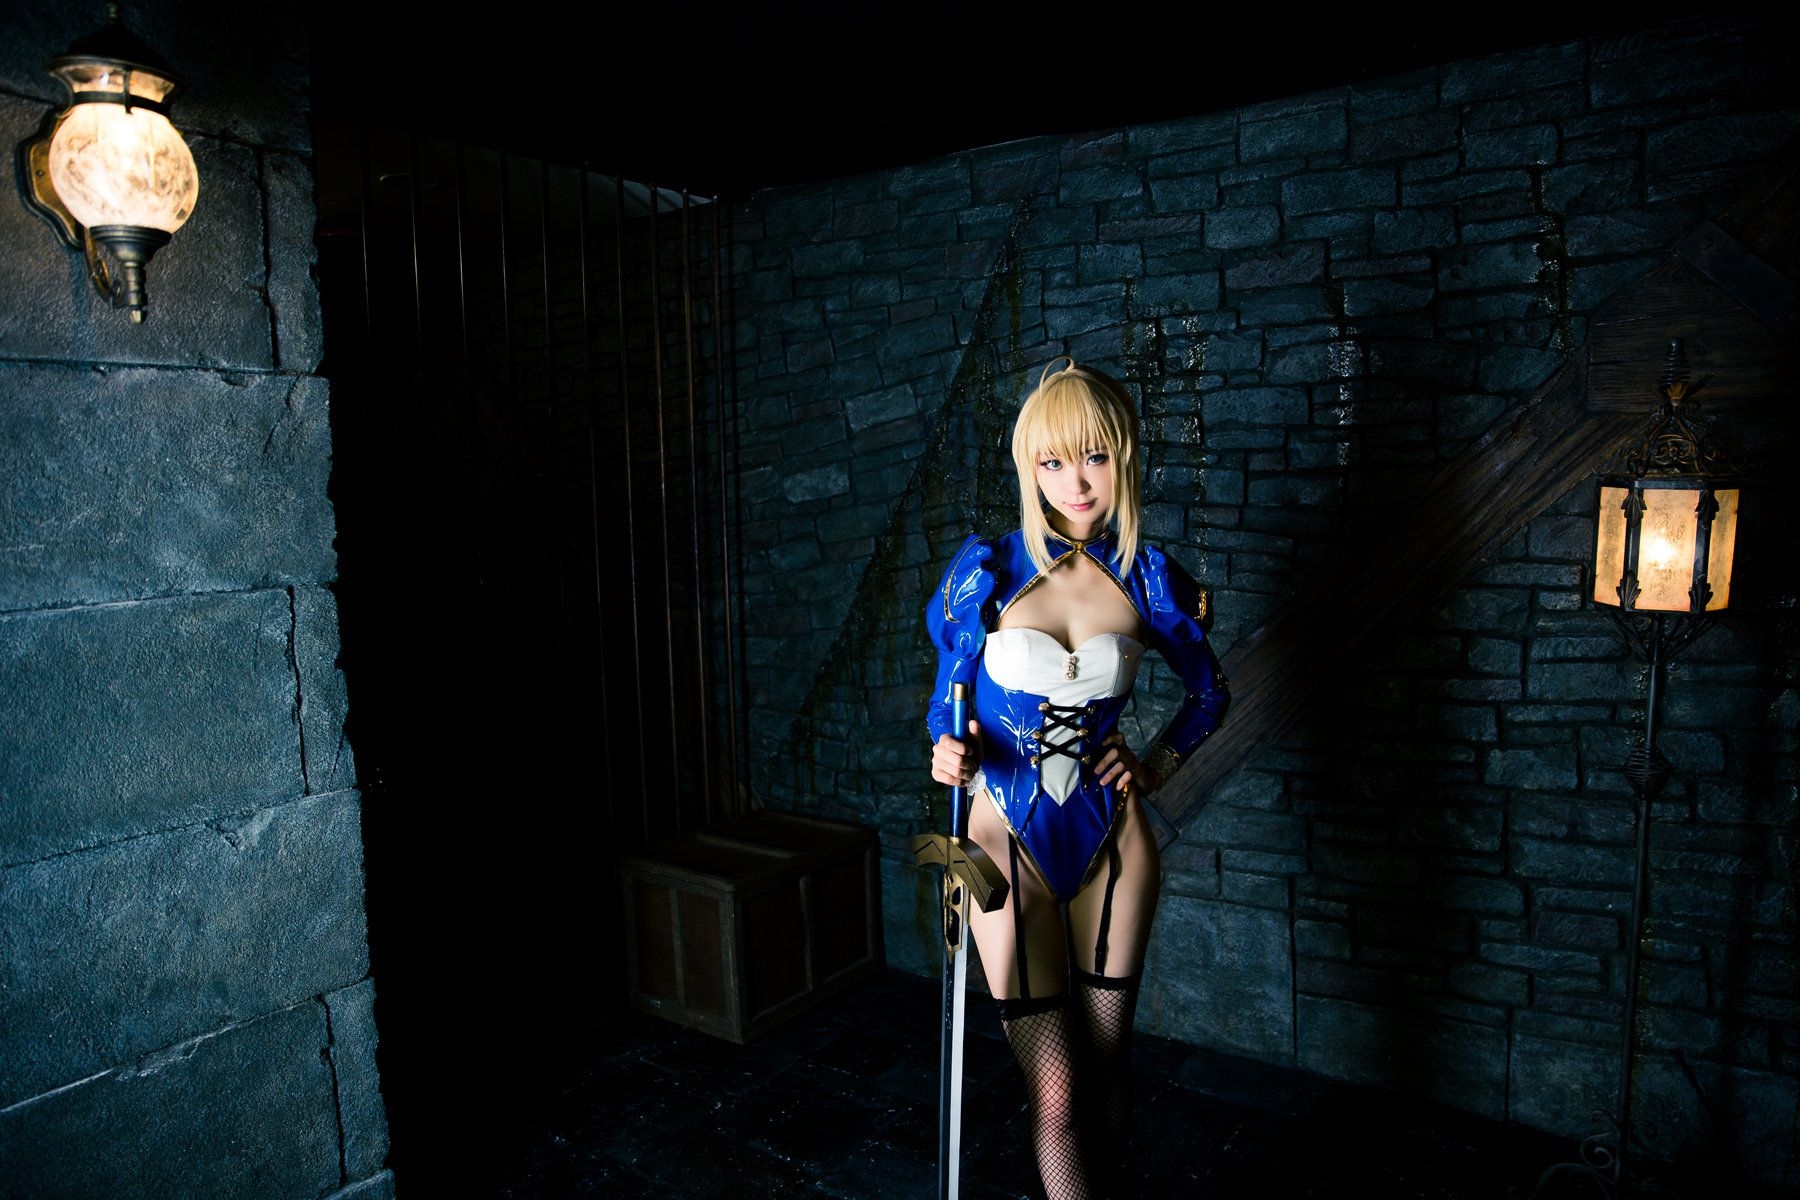 Mike(ミケ) 《Fate stay night》Saber [Mikehouse] 